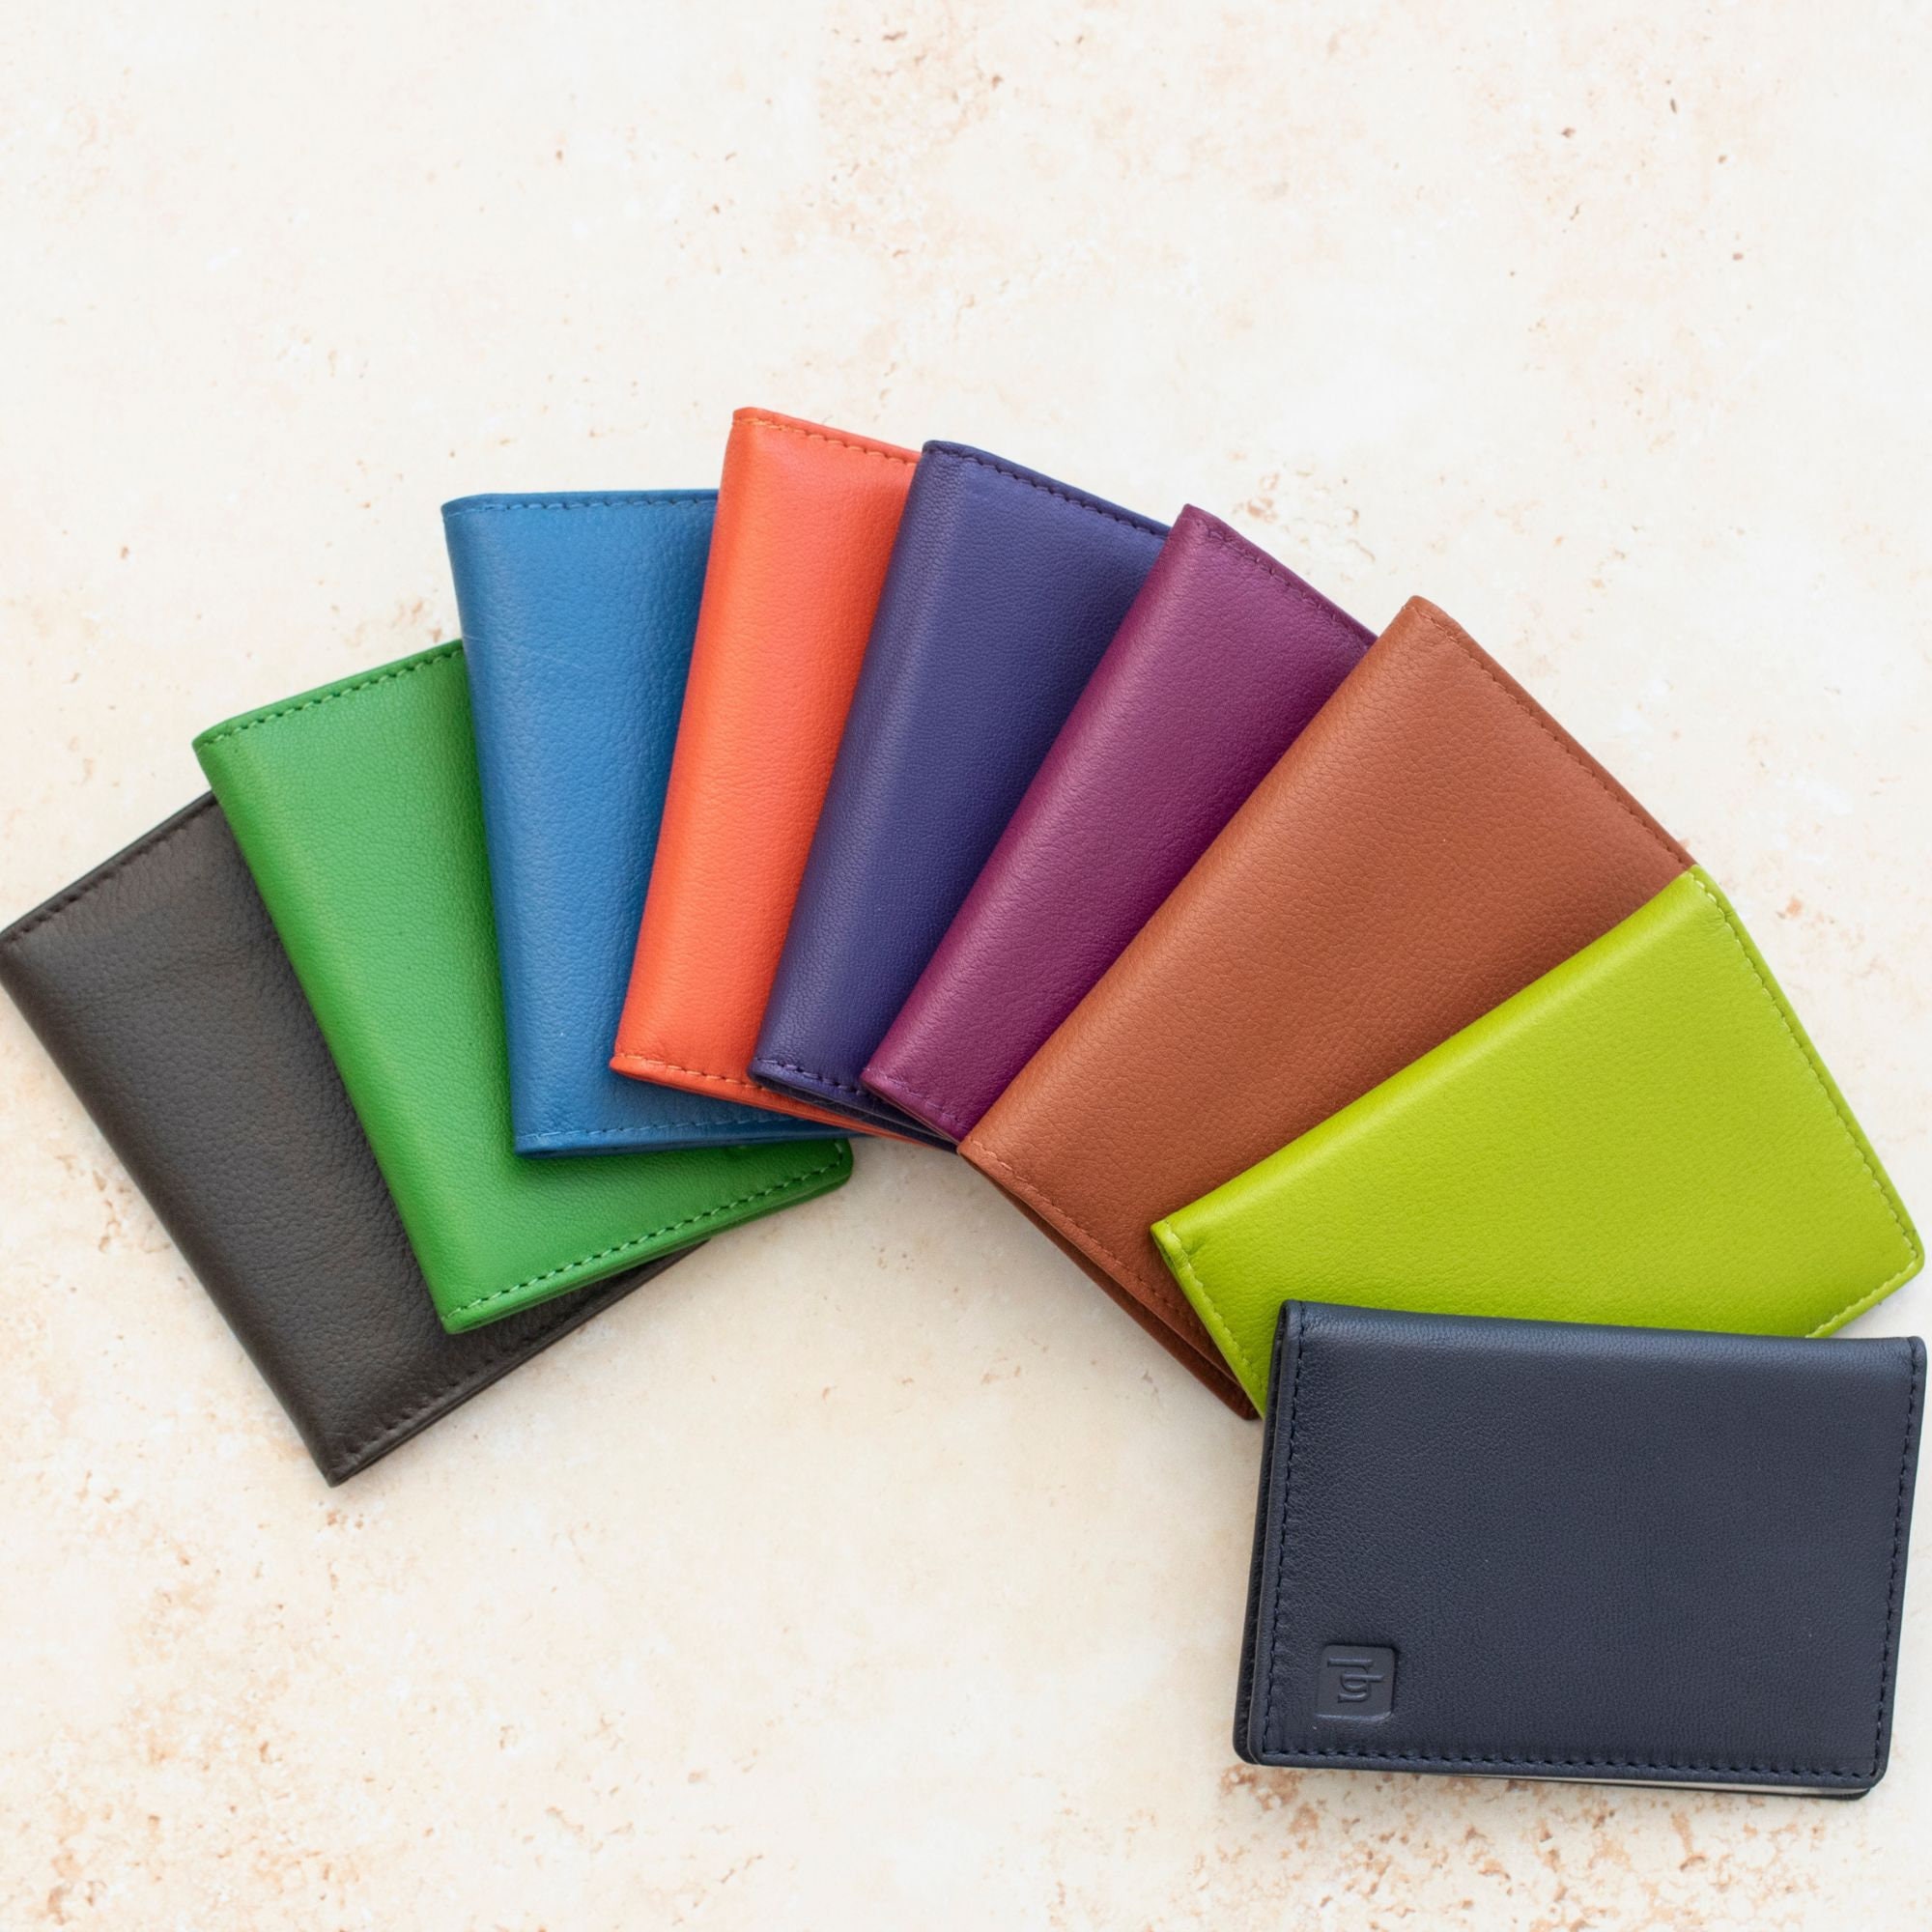 Cheap High Quality ID Credit Card Bank Card Holder Wallet Luxury Anti Rfid  Block Protection Magic Leather Slim Money Wallet Cover